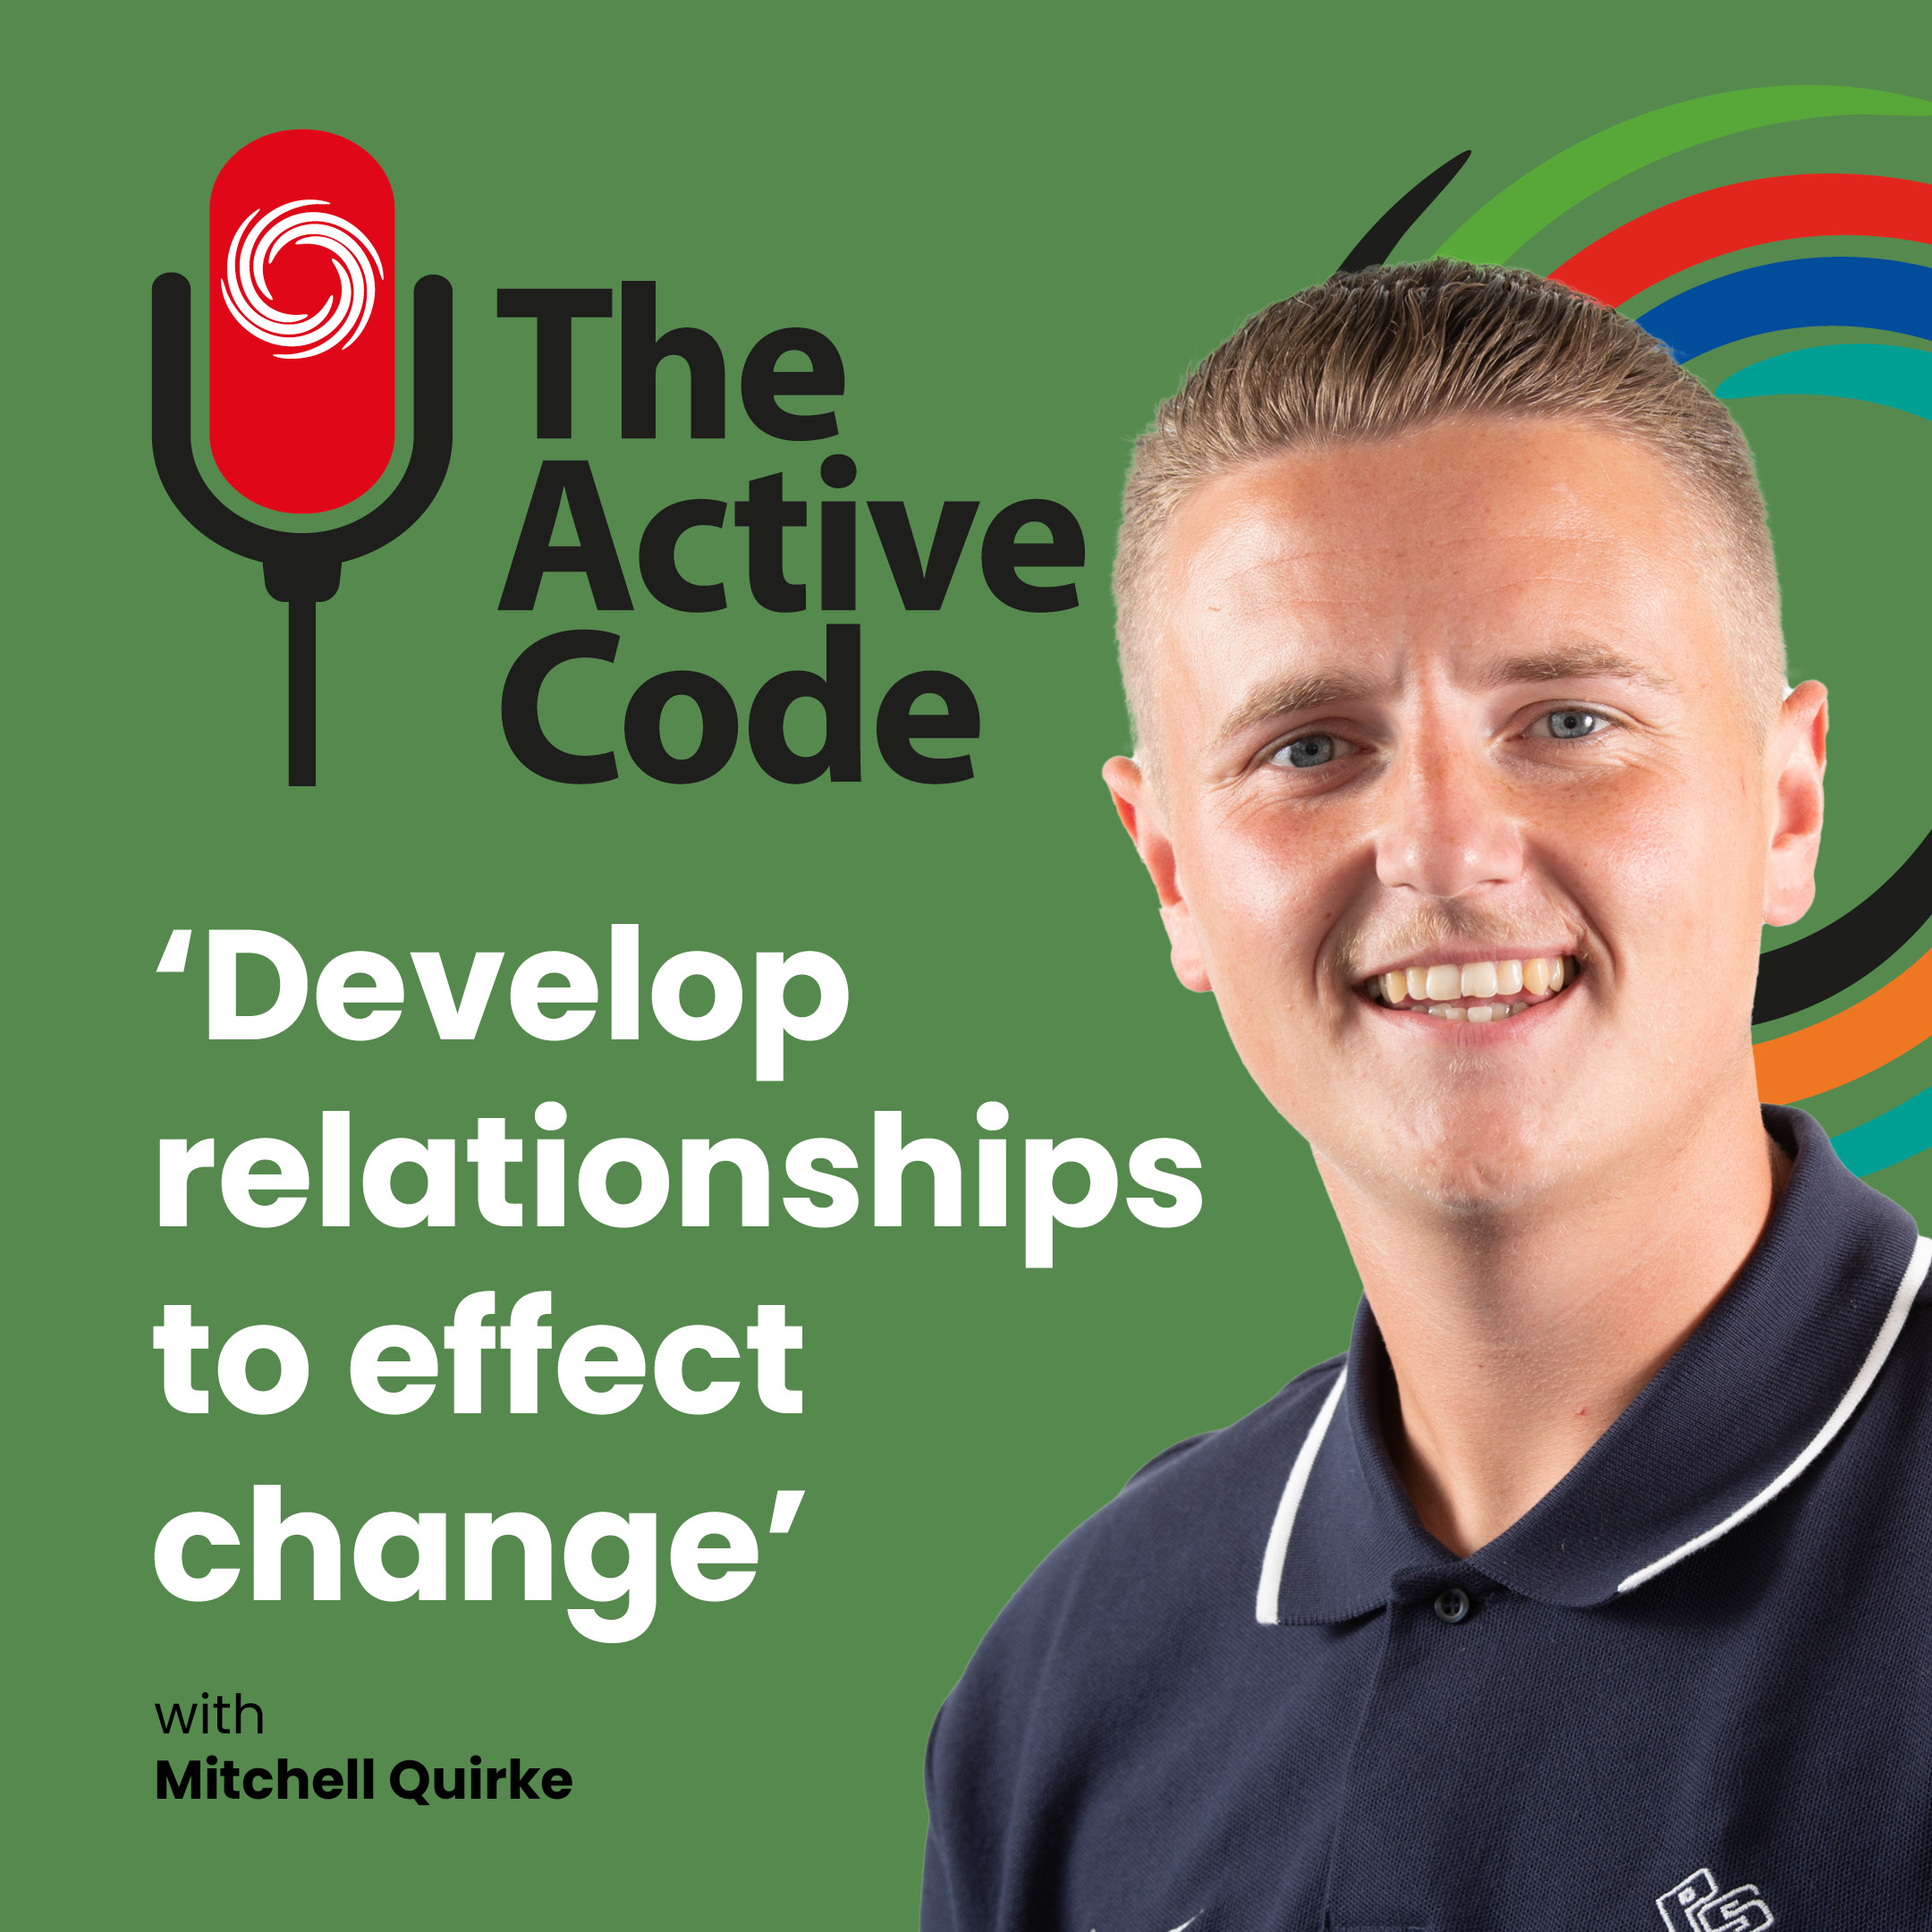 The Active Code SERIES 3 #6 – Develop relationships to effect change.